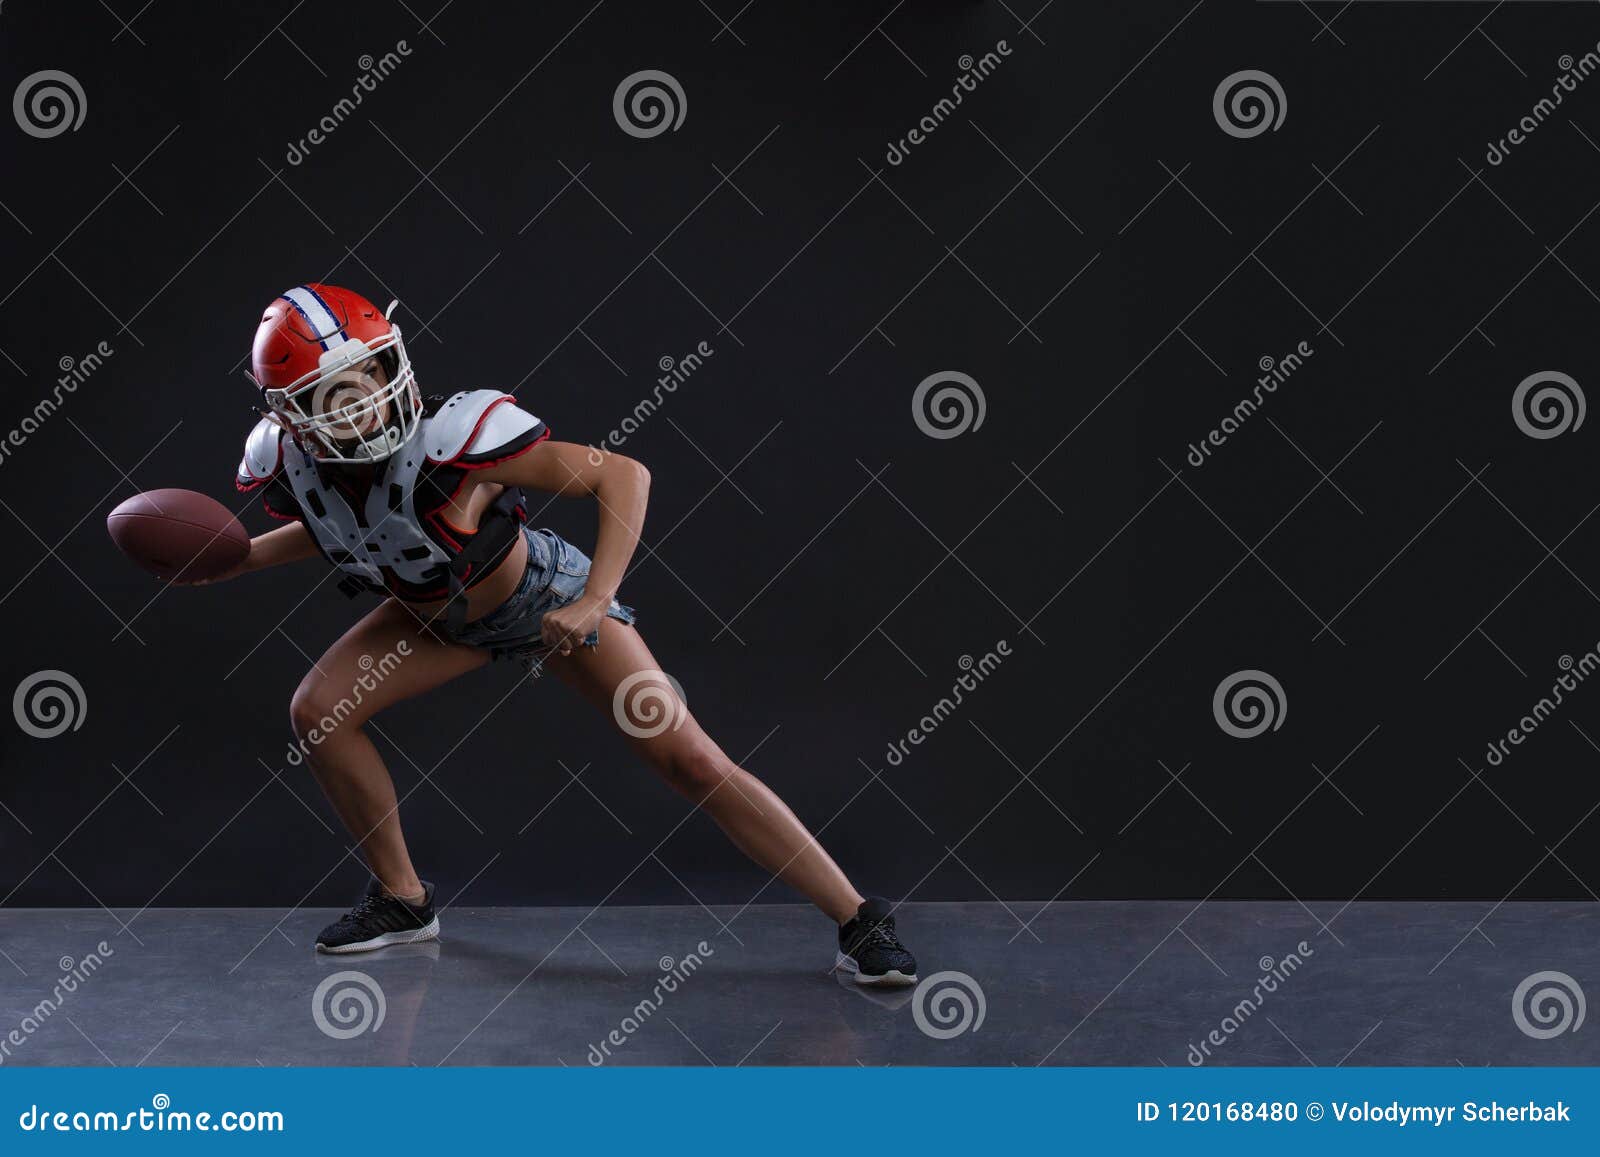 Sexual Sportive Woman Running with Rugby Ball and Screaming Aggressively at Black Background pic image